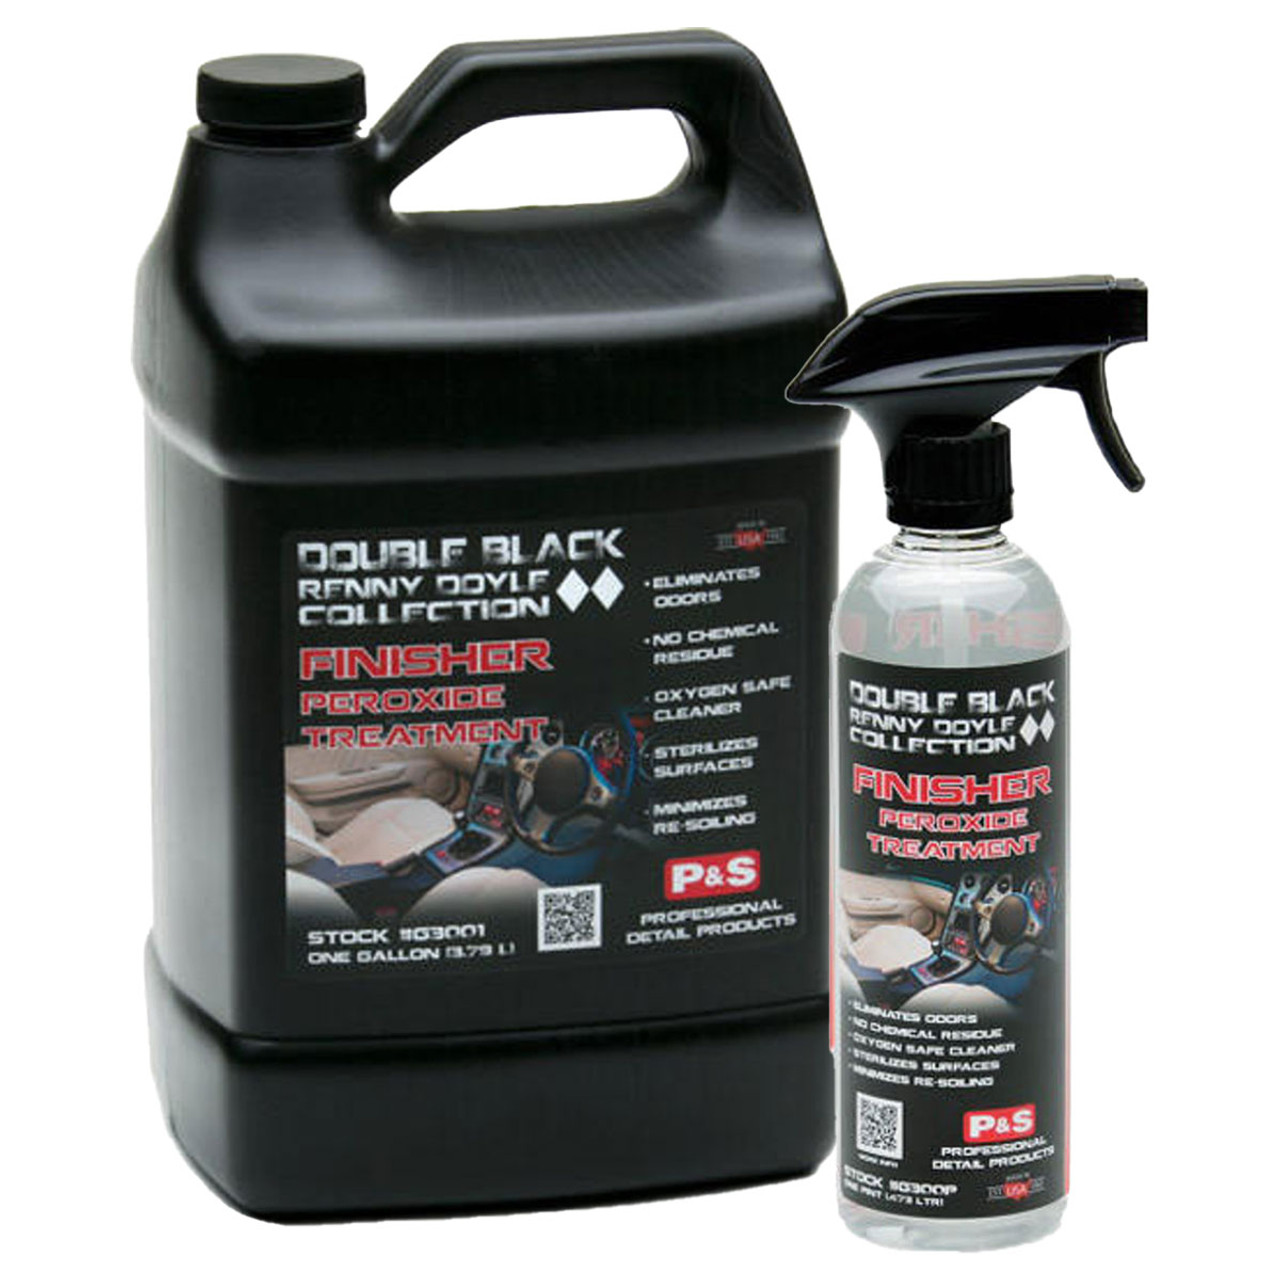 P&S Detail Products updated their - P&S Detail Products